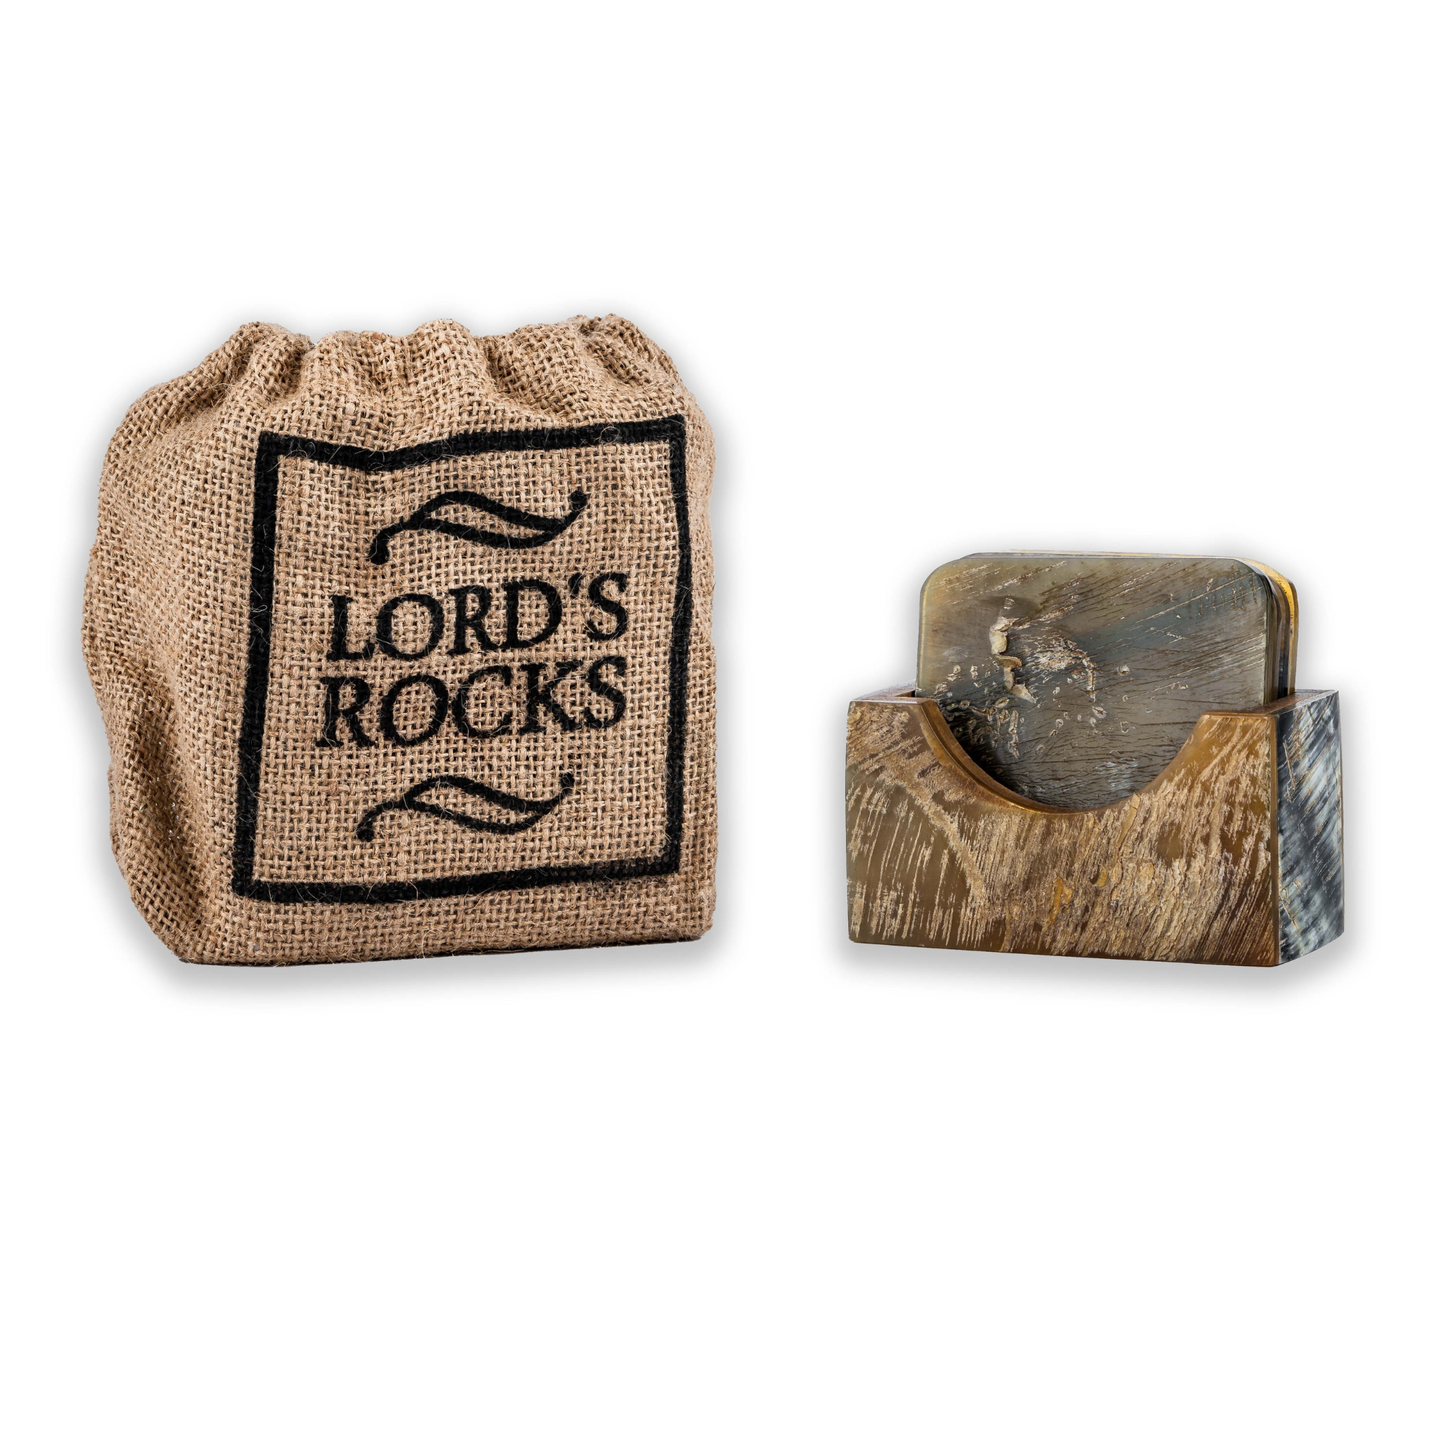 Viking Horn Drink Coasters with Holder by Lord’s Rocks | 4 Piece Square Coaster Set with Reusable Bag | 4-Inch Coasters for Coffee Table and Unique Gifts for Men